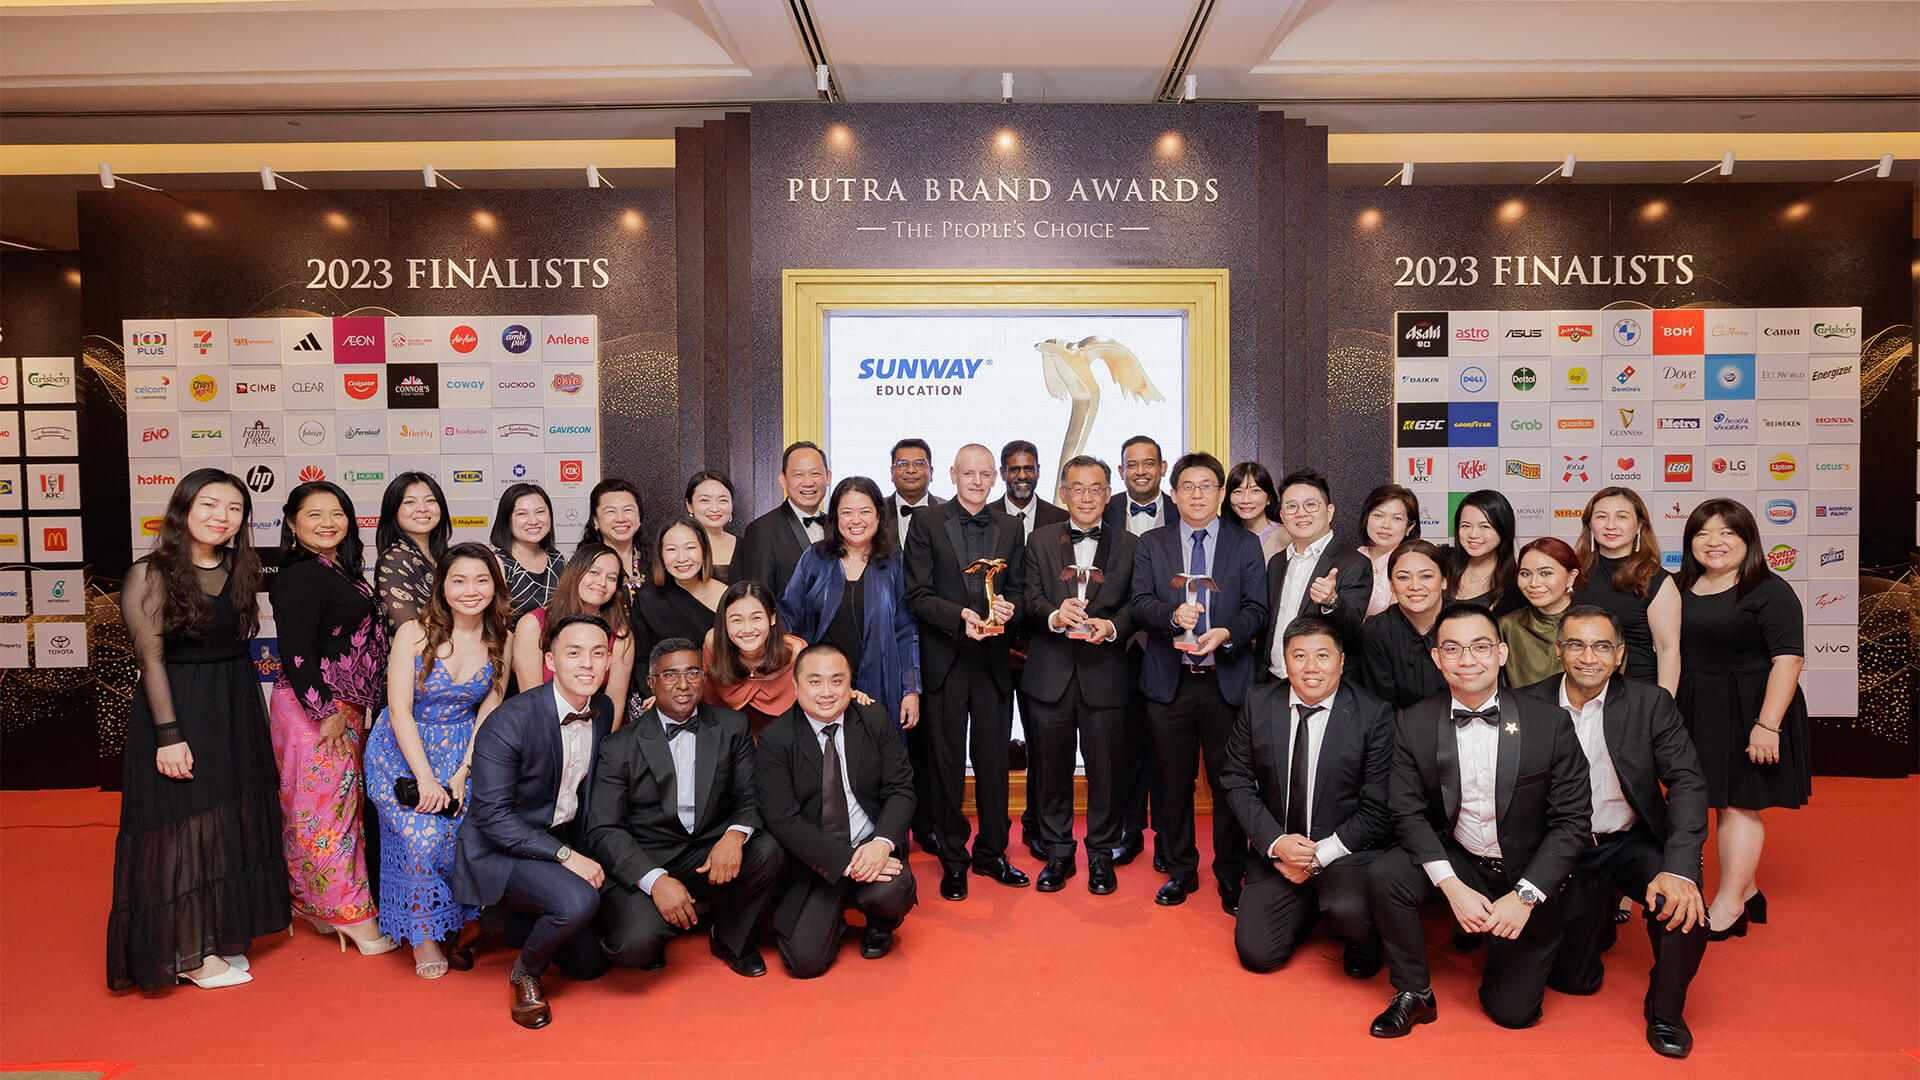 Sunway Group, one of Southeast Asia’s leading conglomerates, won four awards at the 2023 Putra Brand Awards, including the coveted Putra Enterprising Brand of the Year Award for Sunway Education Group.